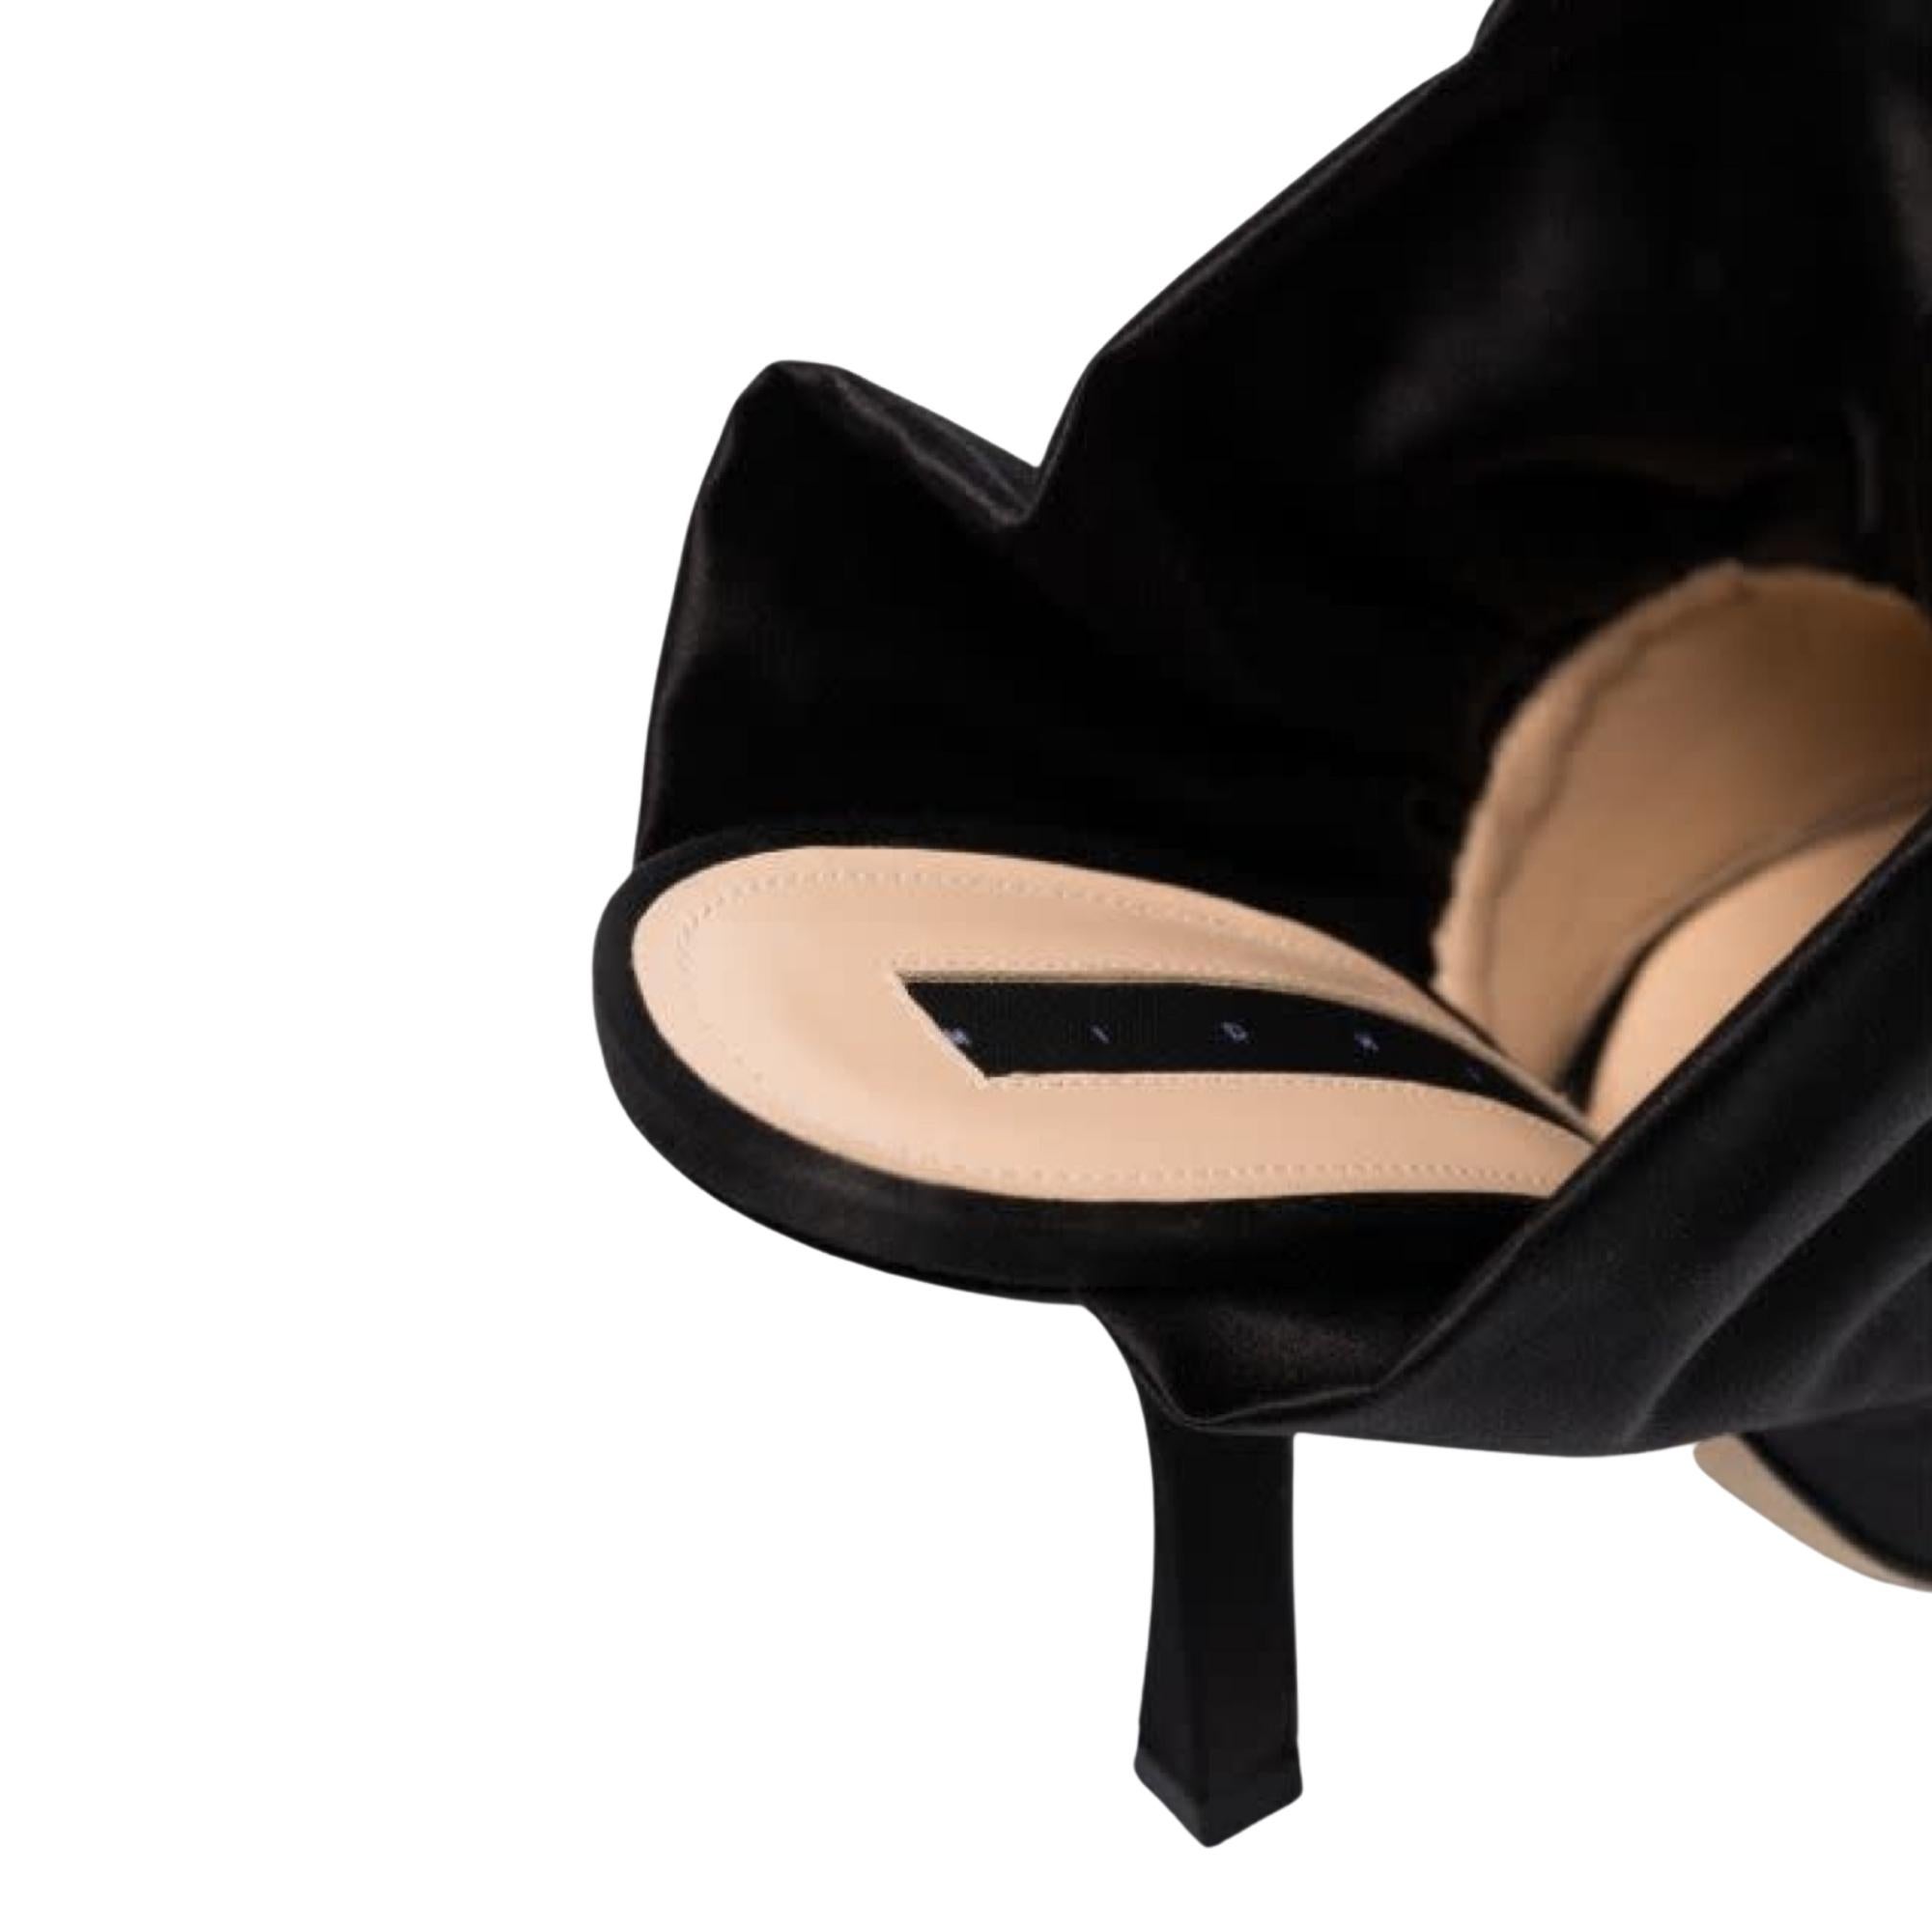 Midnight 00 Antoinette Moon 55 Ruffle Pumps Black (37 EU) In New Condition For Sale In Montreal, Quebec